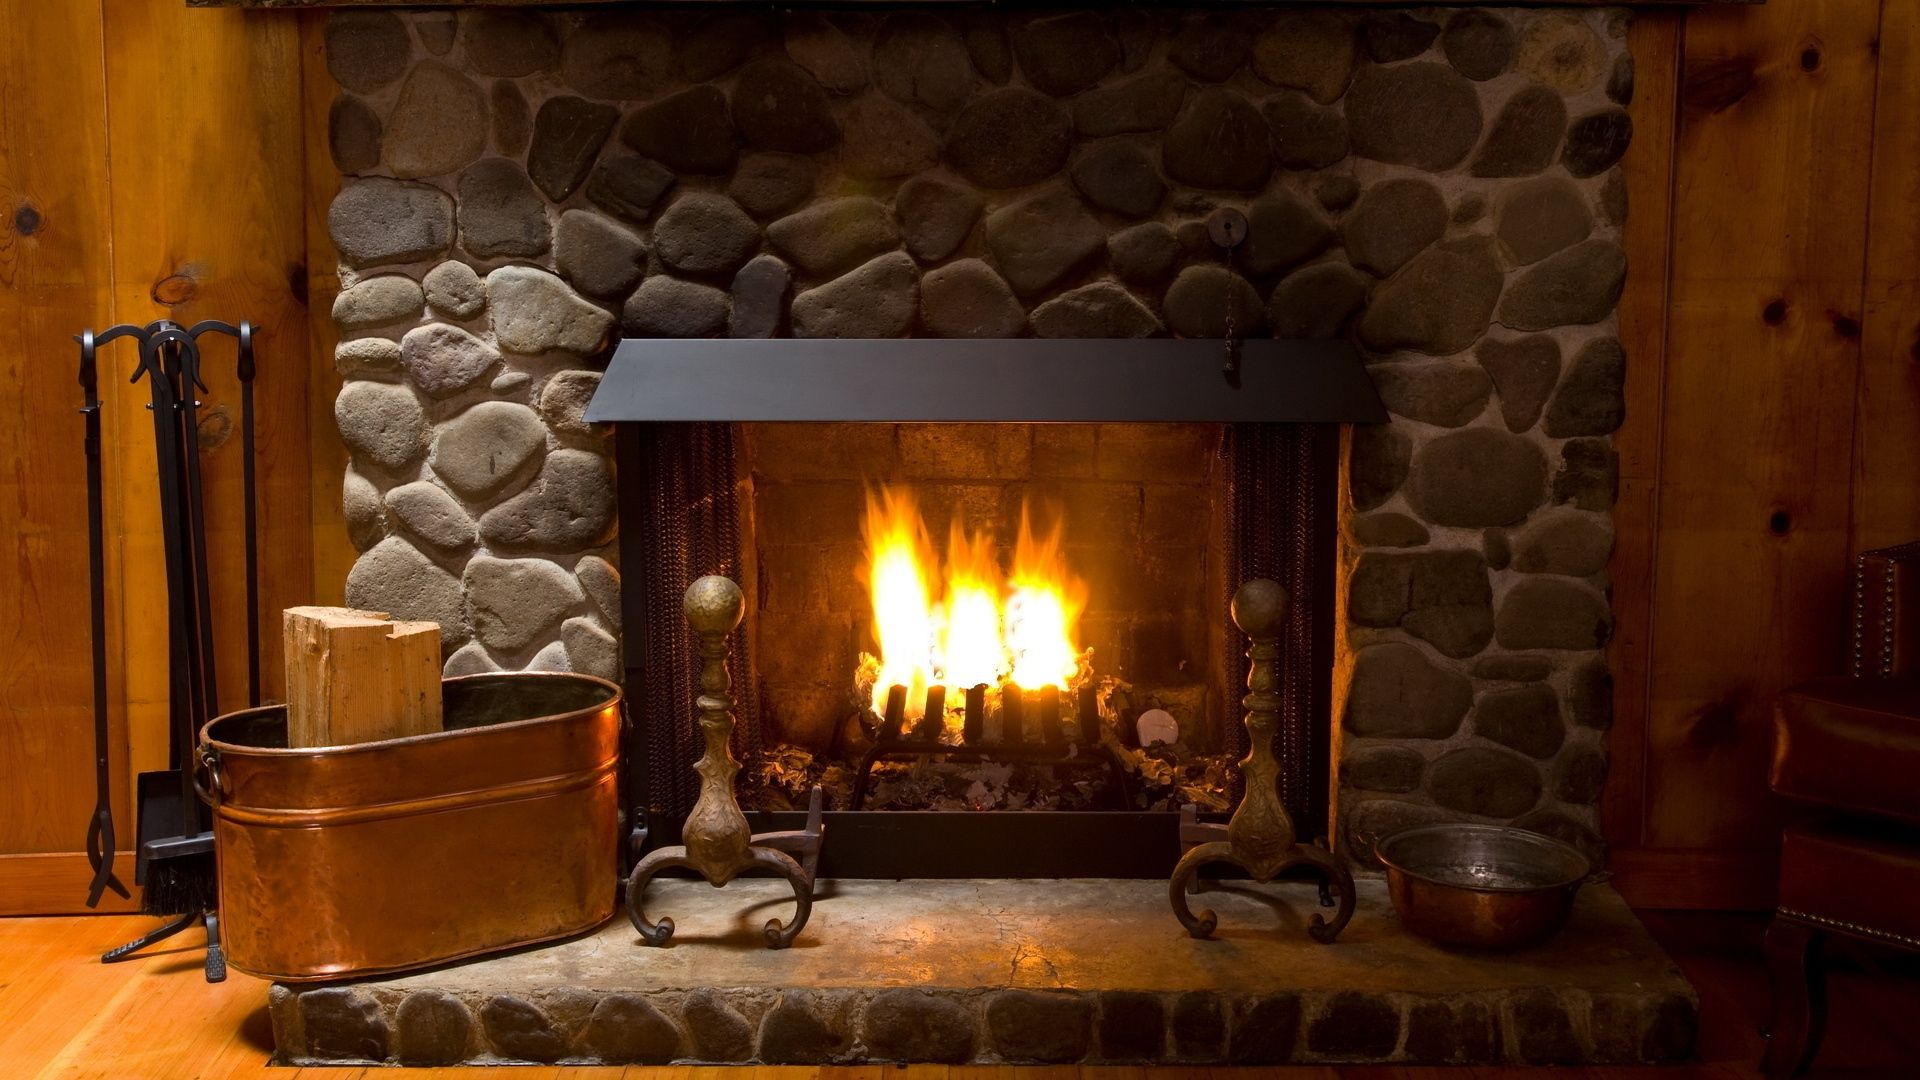 Download Wallpaper 1920x1080 fireplace, cozy, interior, lamp Full HD 1080p HD Background